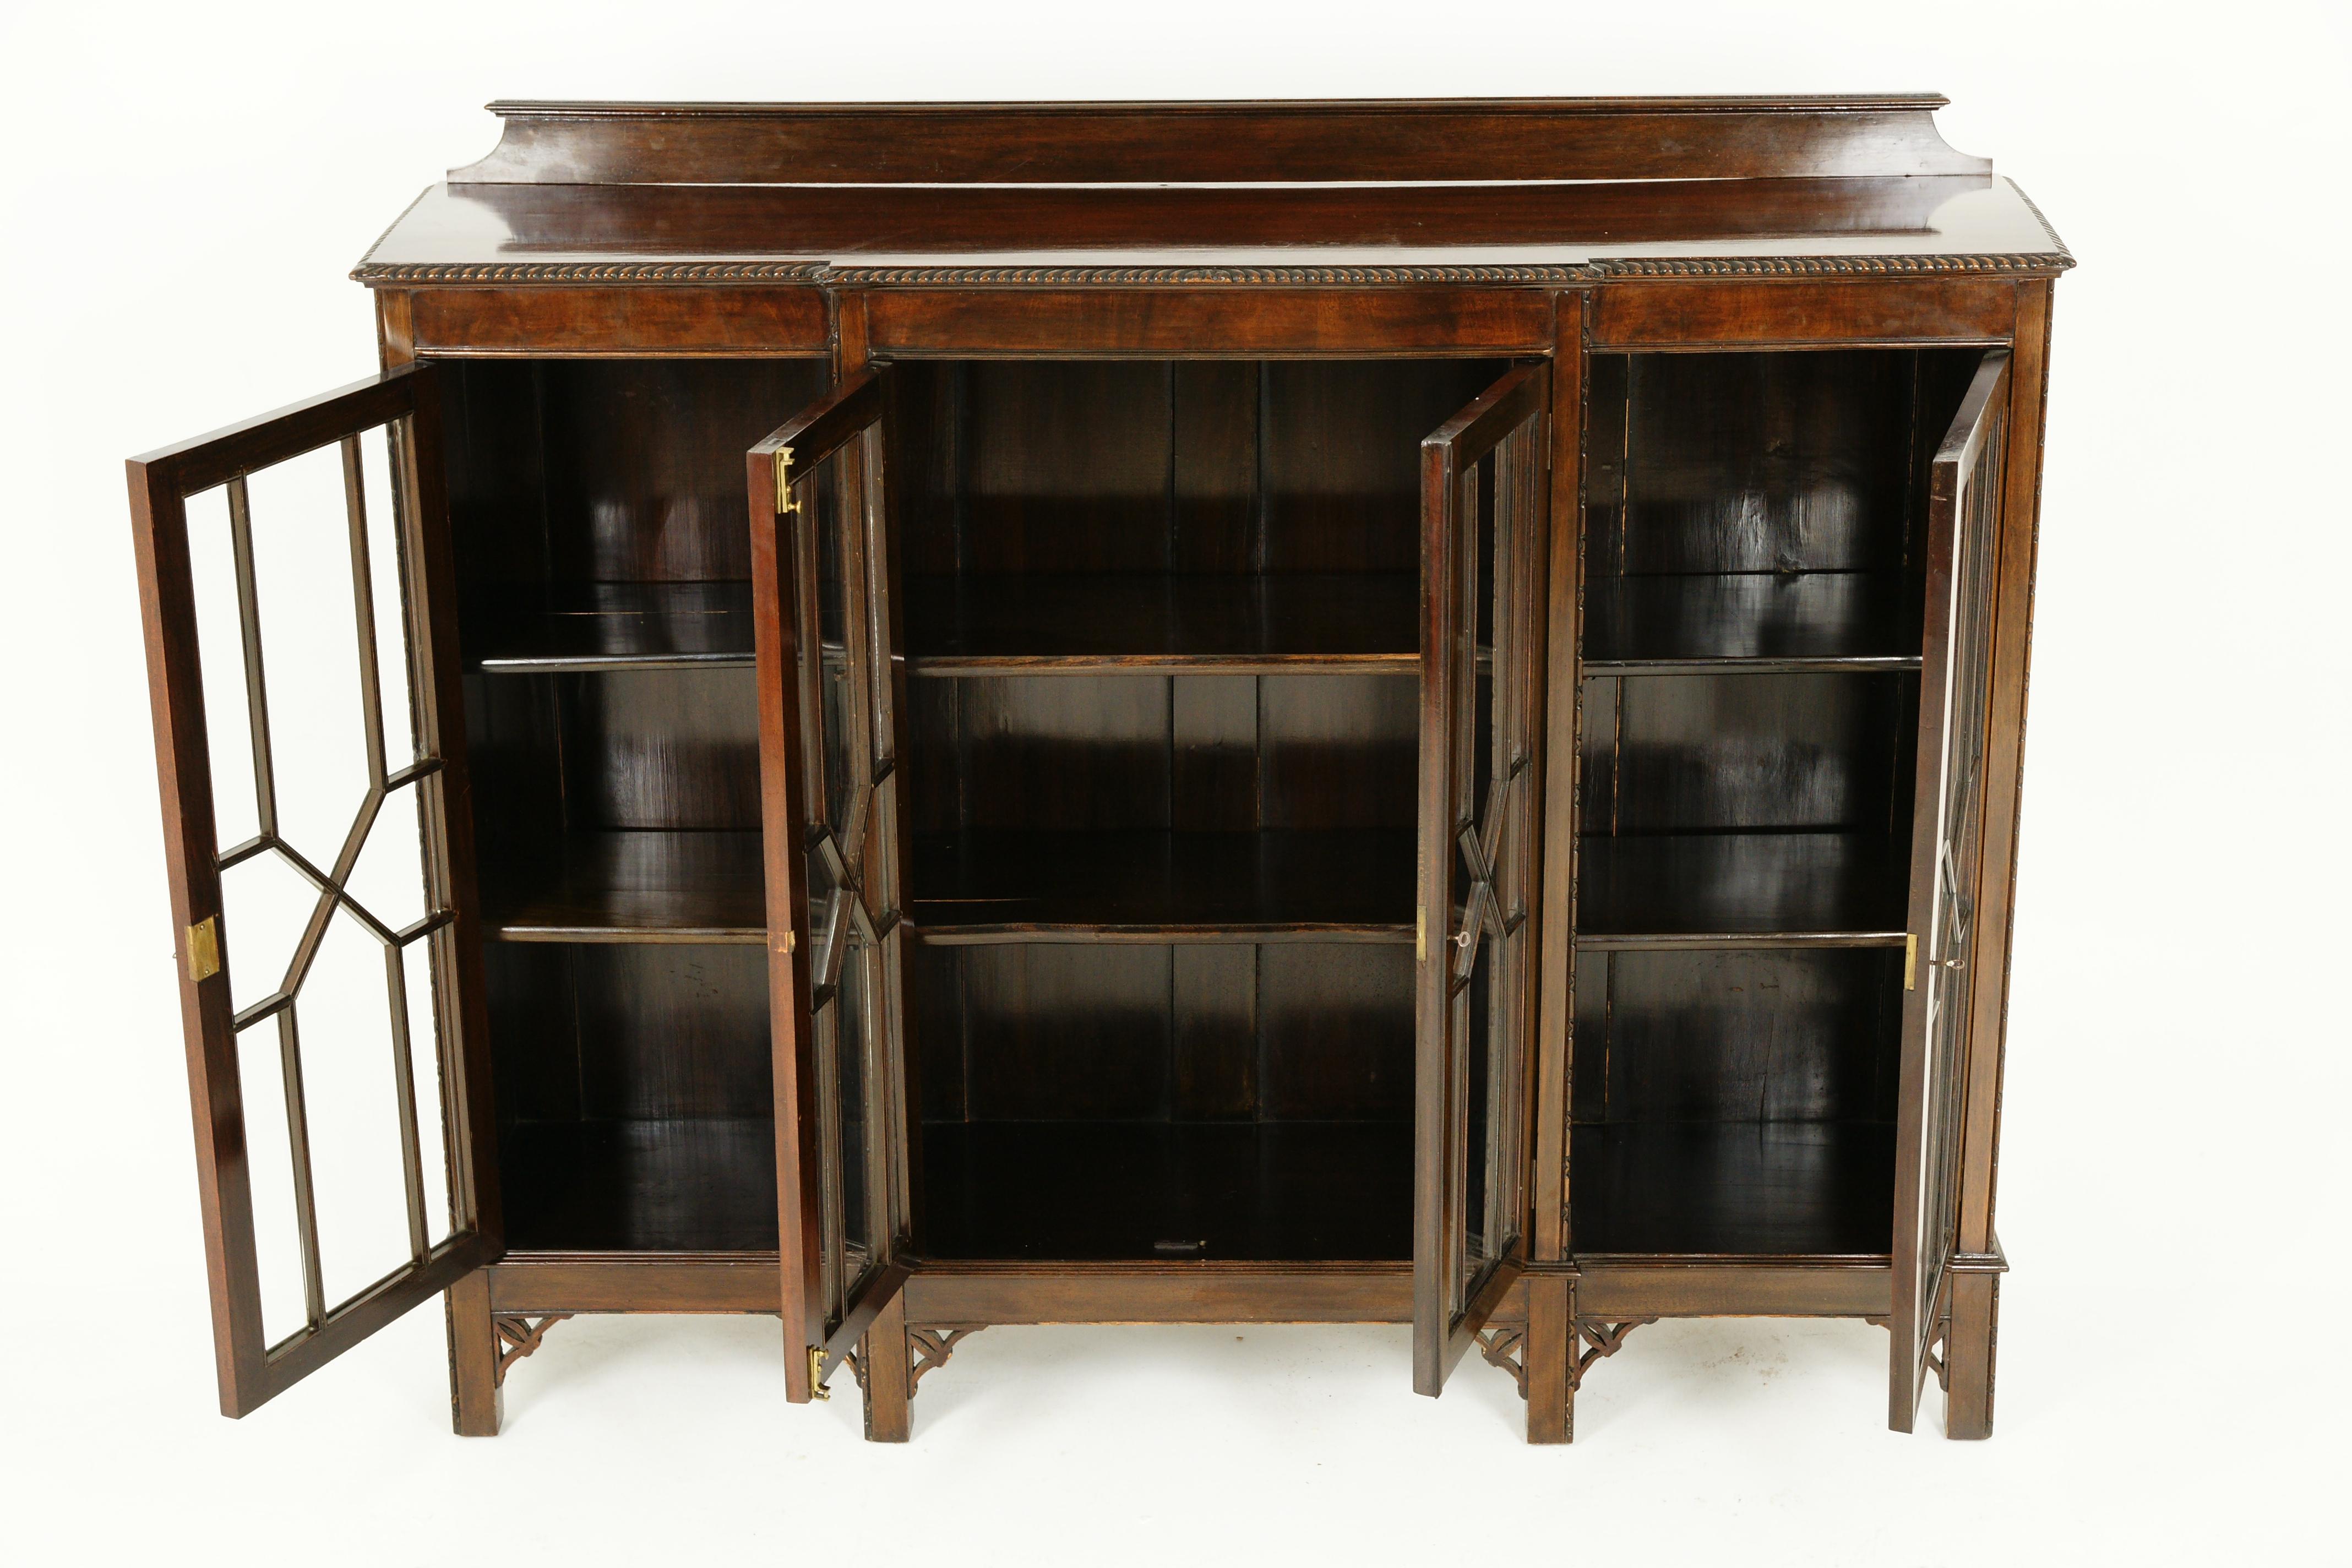 Antique walnut display cabinet, Chippendale style, 4 door breakfront bookcase, Scotland 1920, B2437

Scotland, 1920
Solid walnut
Original finish
Has scalloped out and carved top edge
Shaped pediment on top
Four original glass doors, all of which can